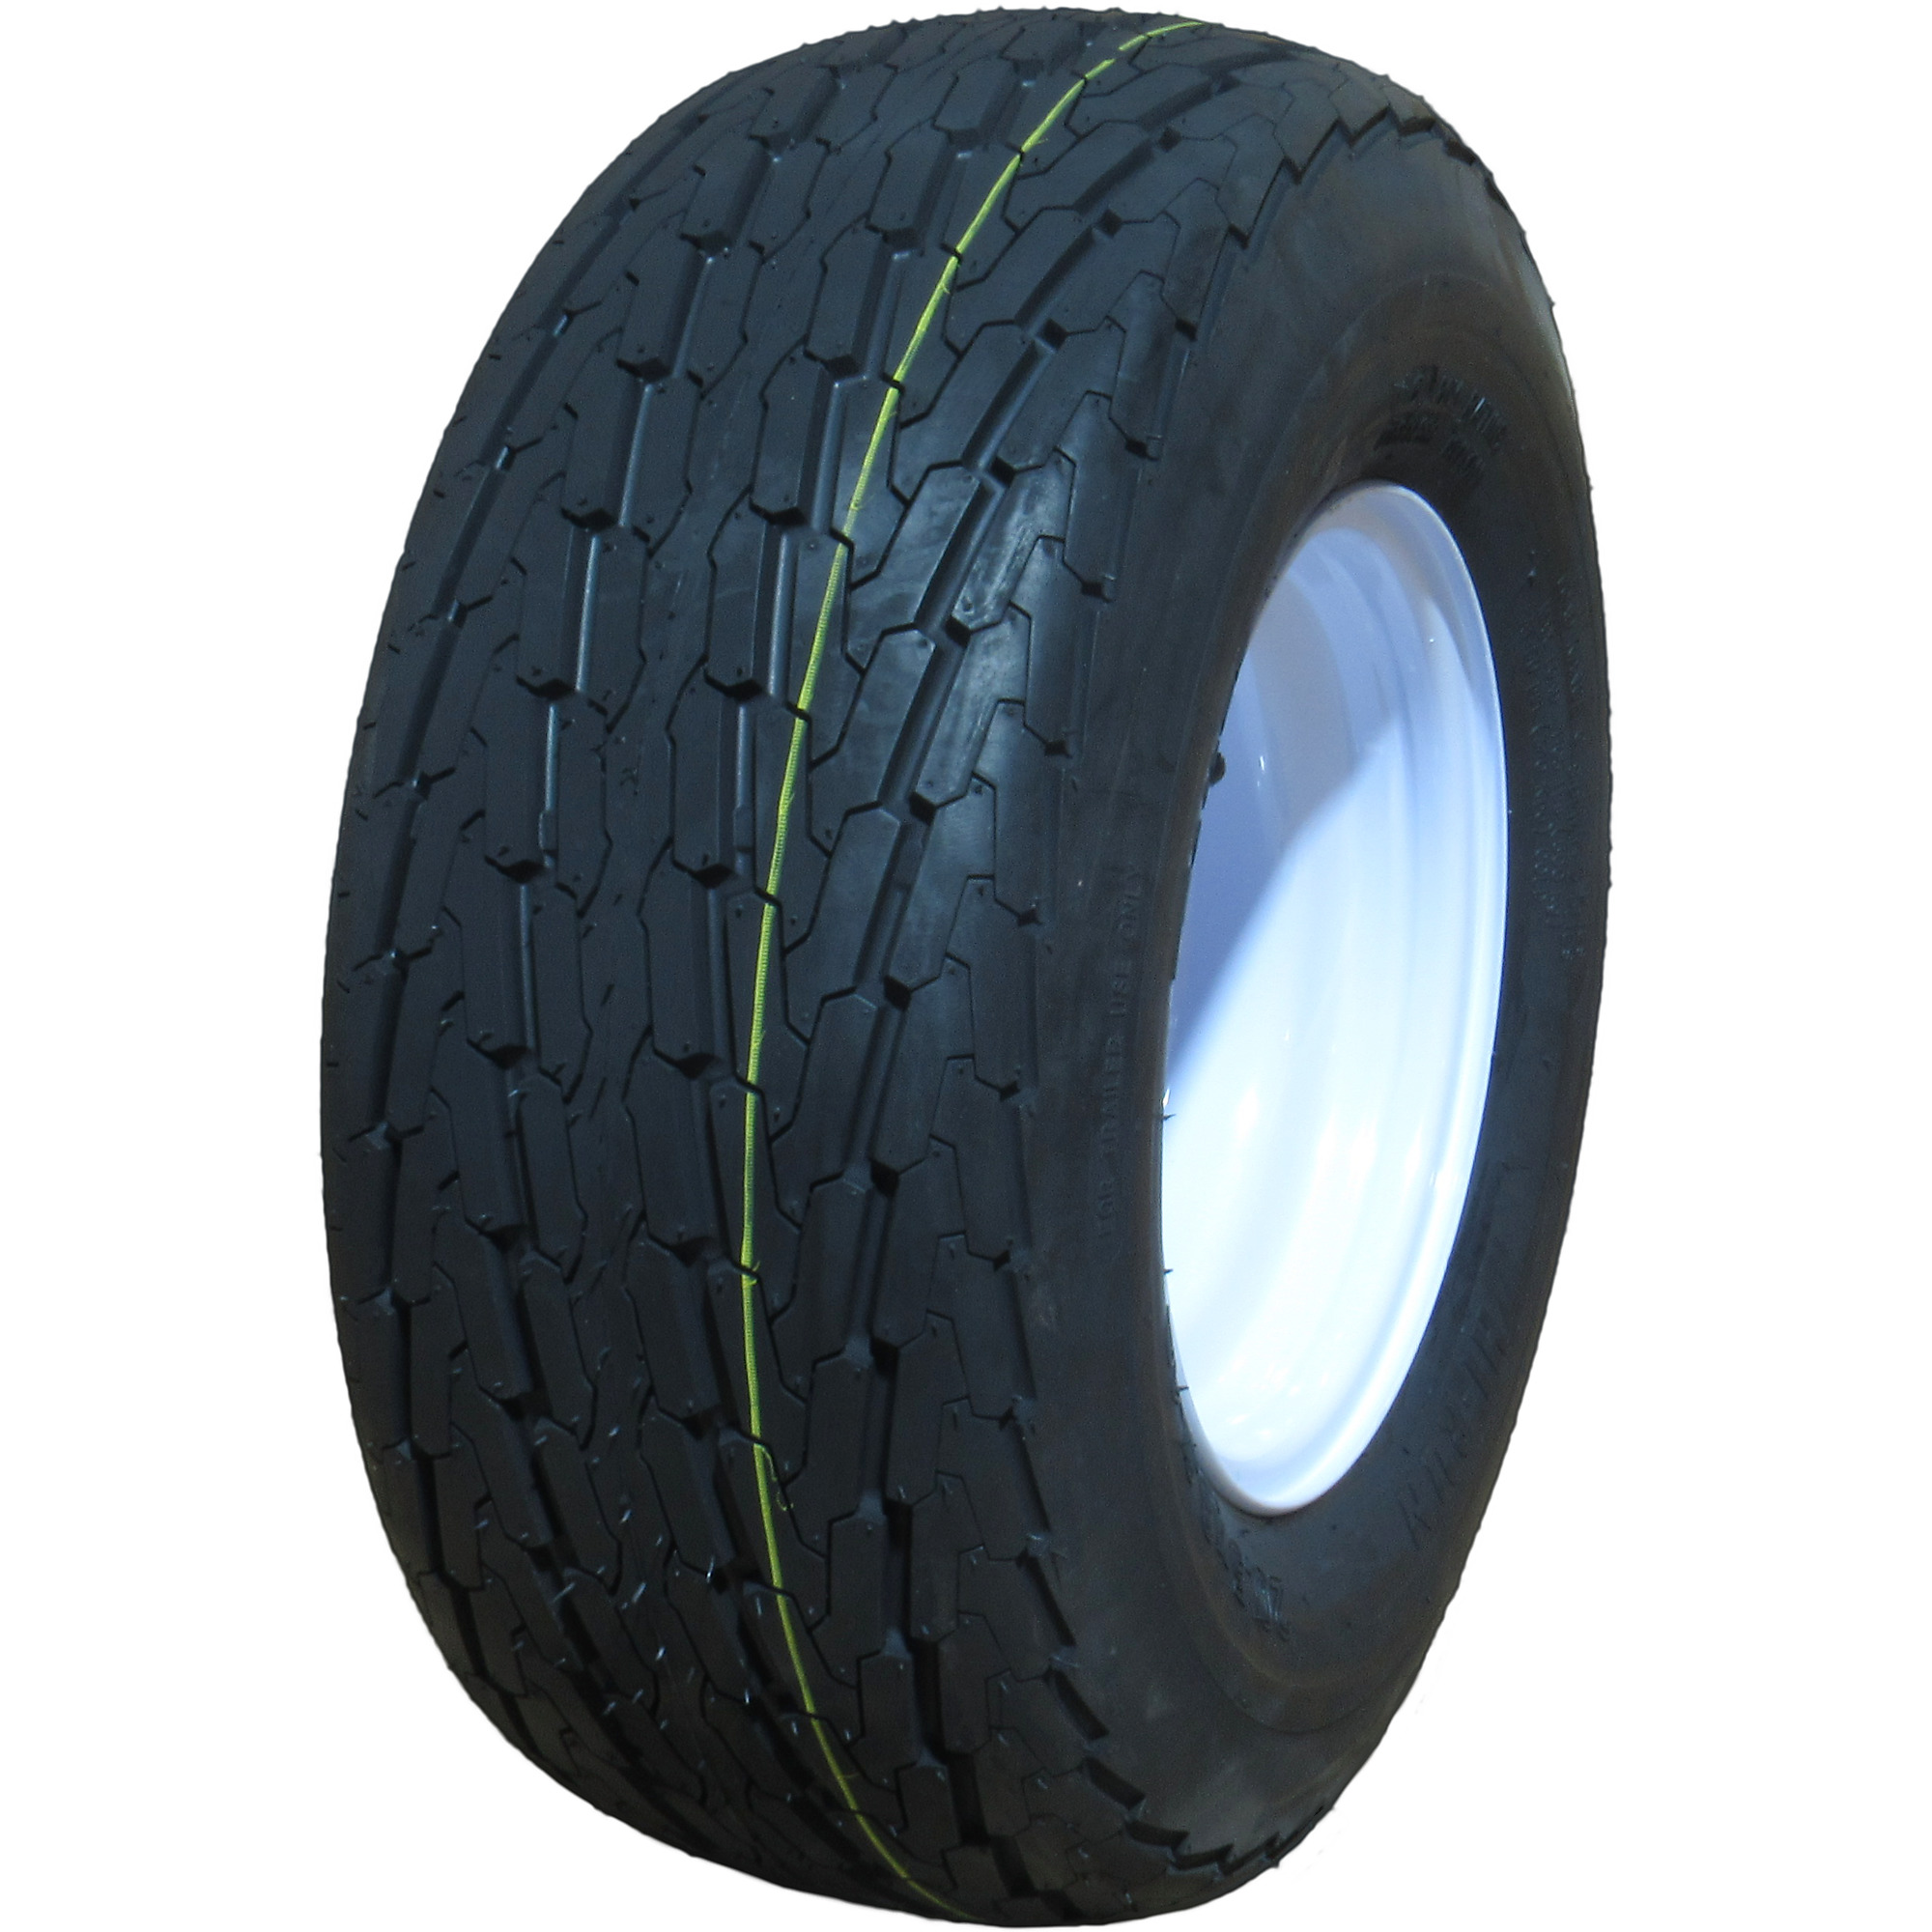 HI-RUN, Highway Trailer Tire Assembly, Bias-Ply, Tire Size 20.5X8.00-10 Load Range Rating C, Bolt Holes (qty.) 5 Model ASB1018